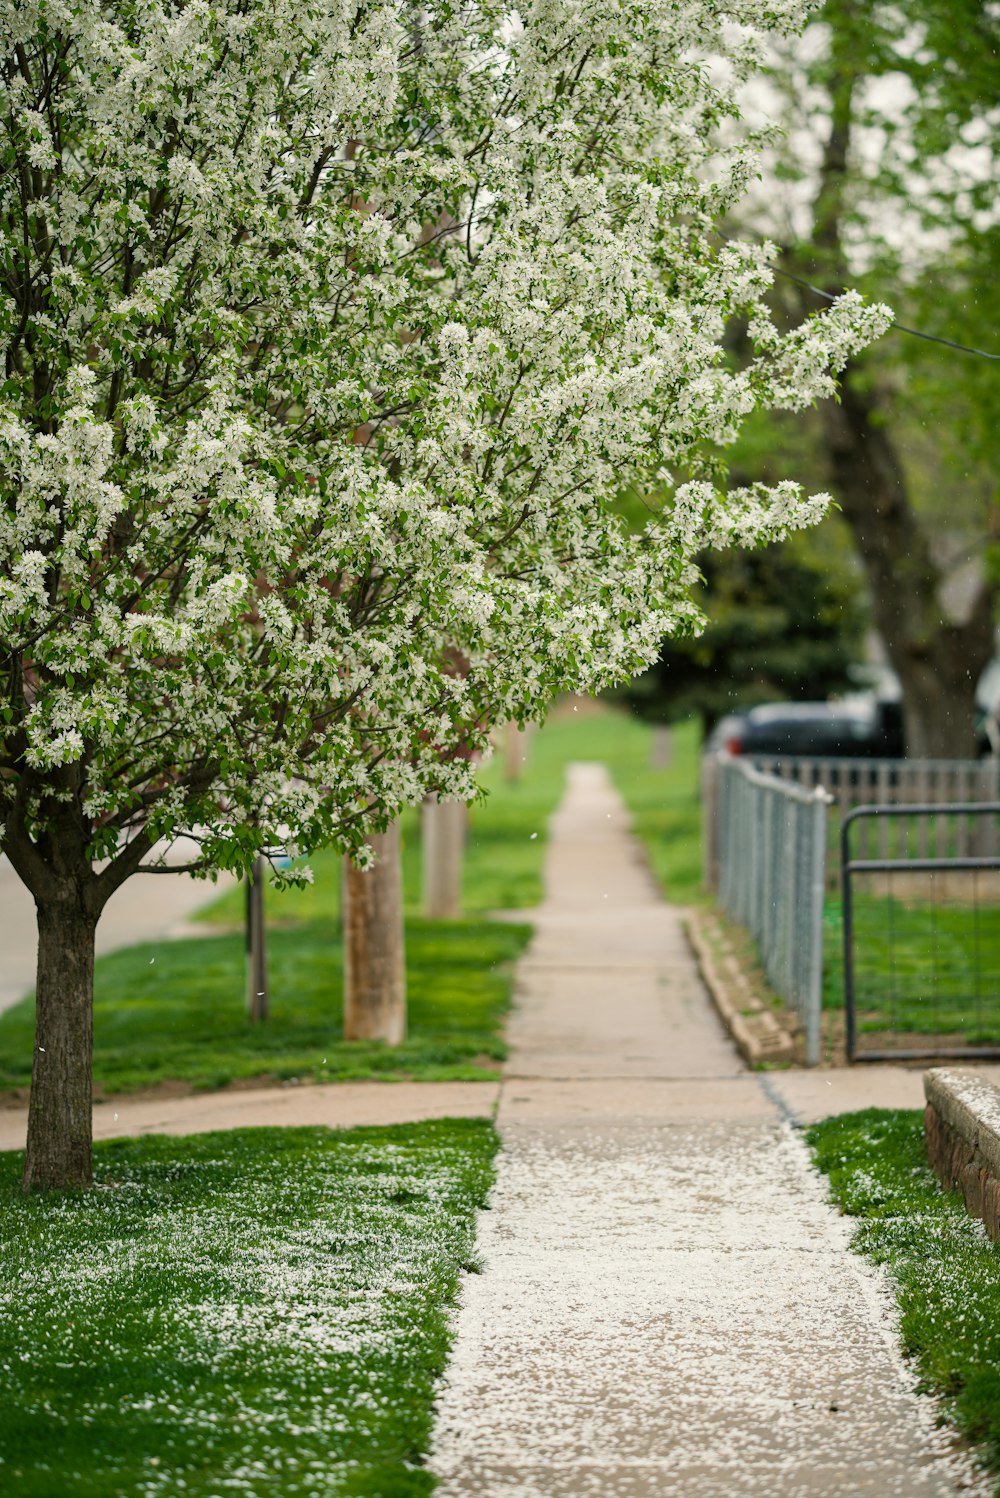 a tree with white flowers on it next to a sidewalk